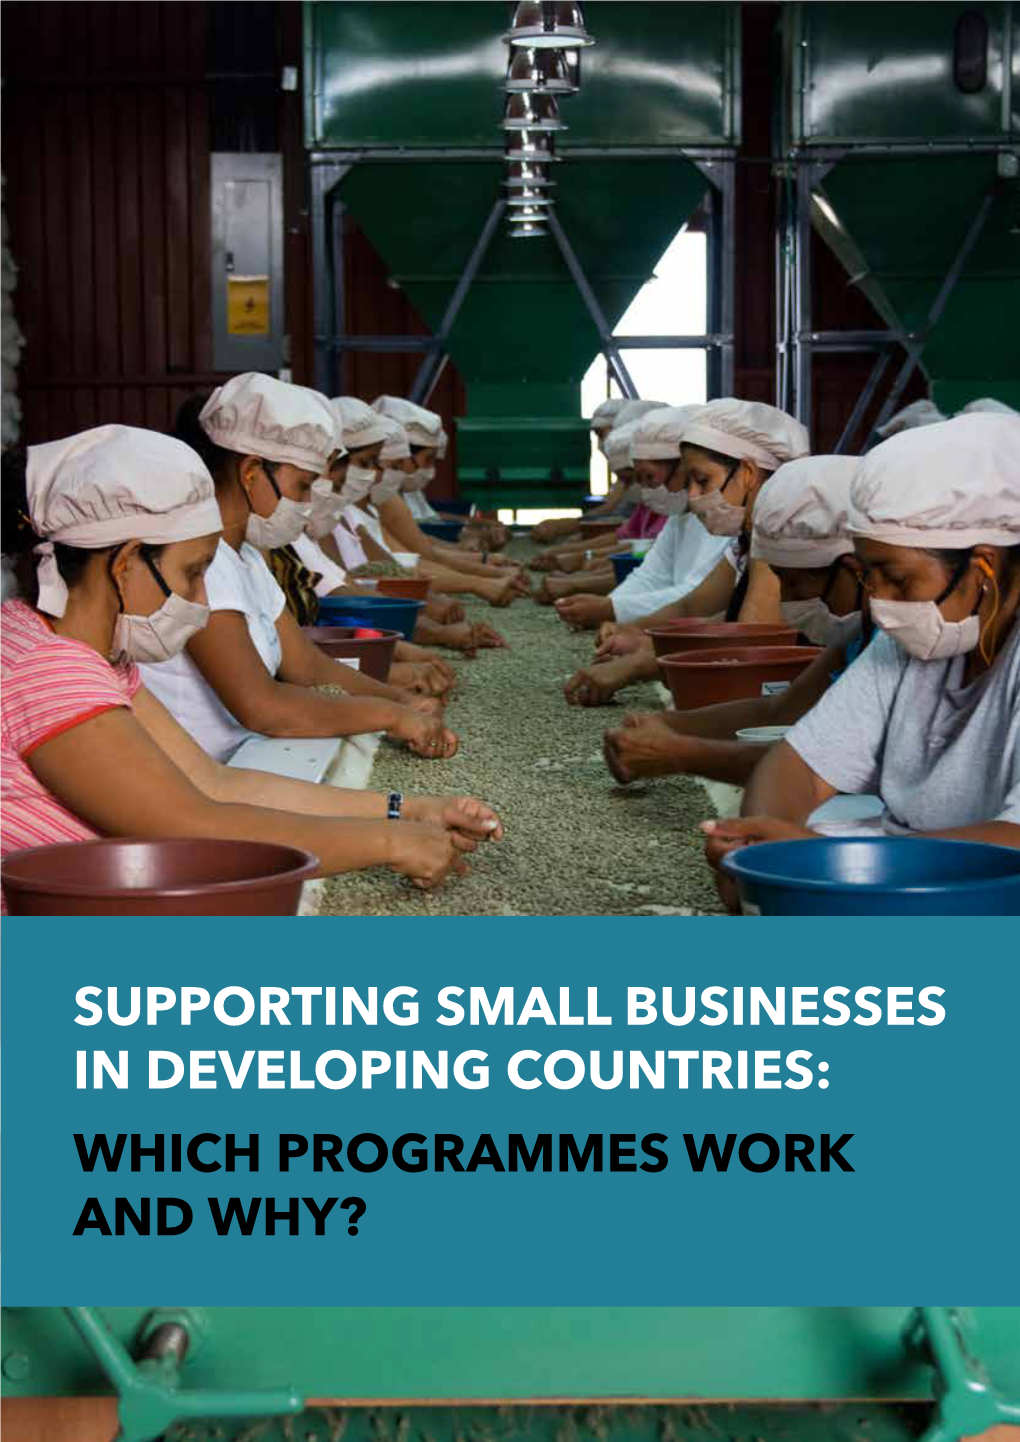 Supporting Small Businesses in Developing Countries: Which Programmes Work and Why? Contents